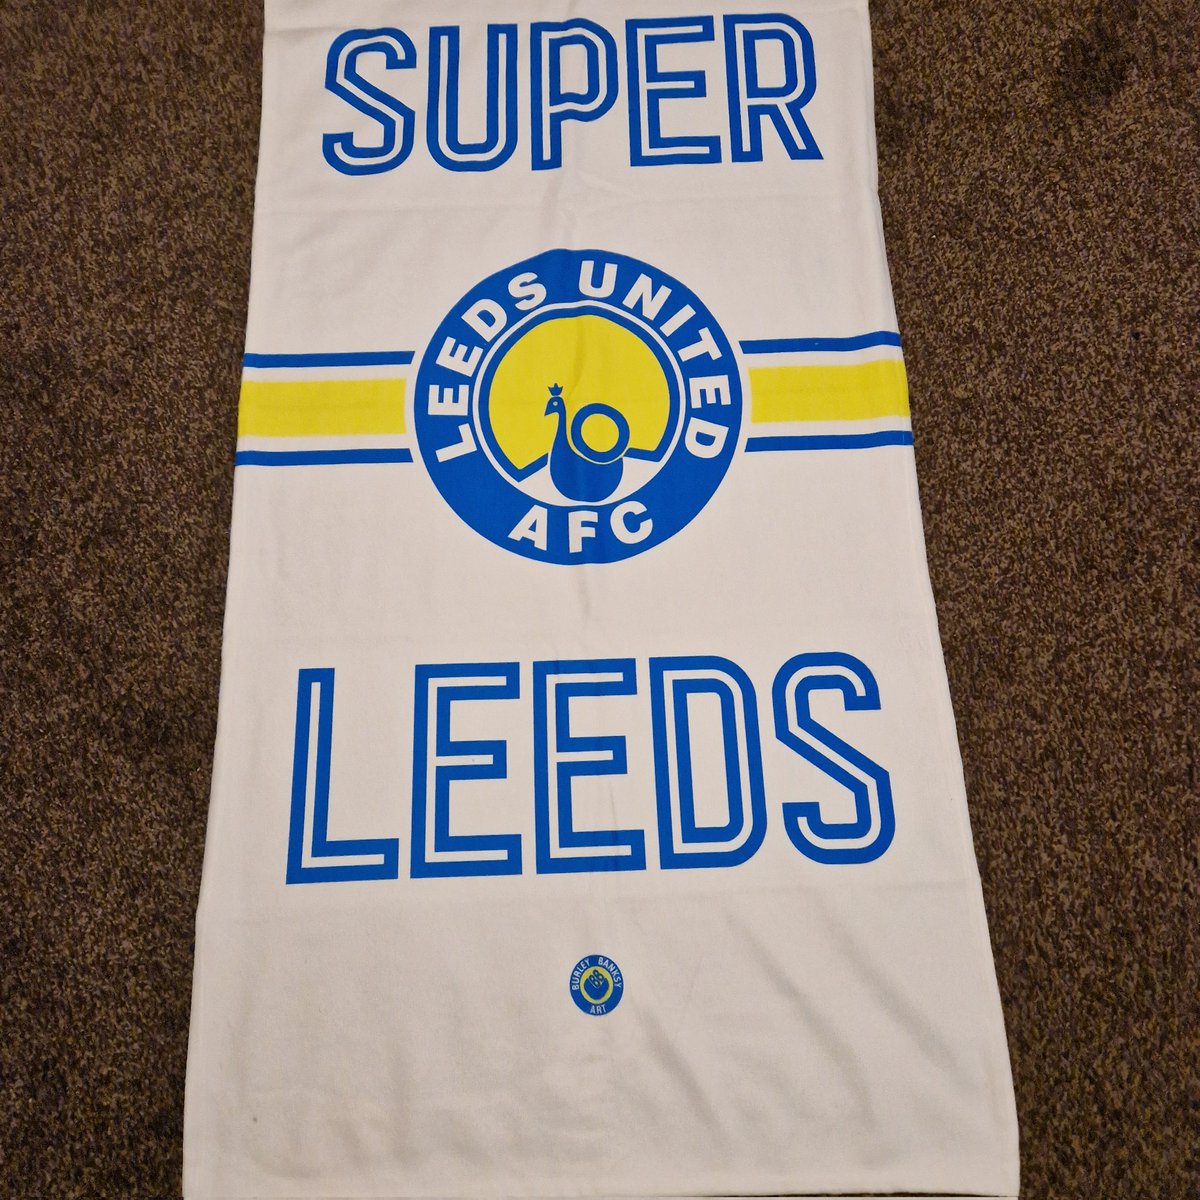 My @merrioncentre shop will be closing on Friday 10th May for good so get some #lufc stuff in the flesh ,so to speak, while you can !